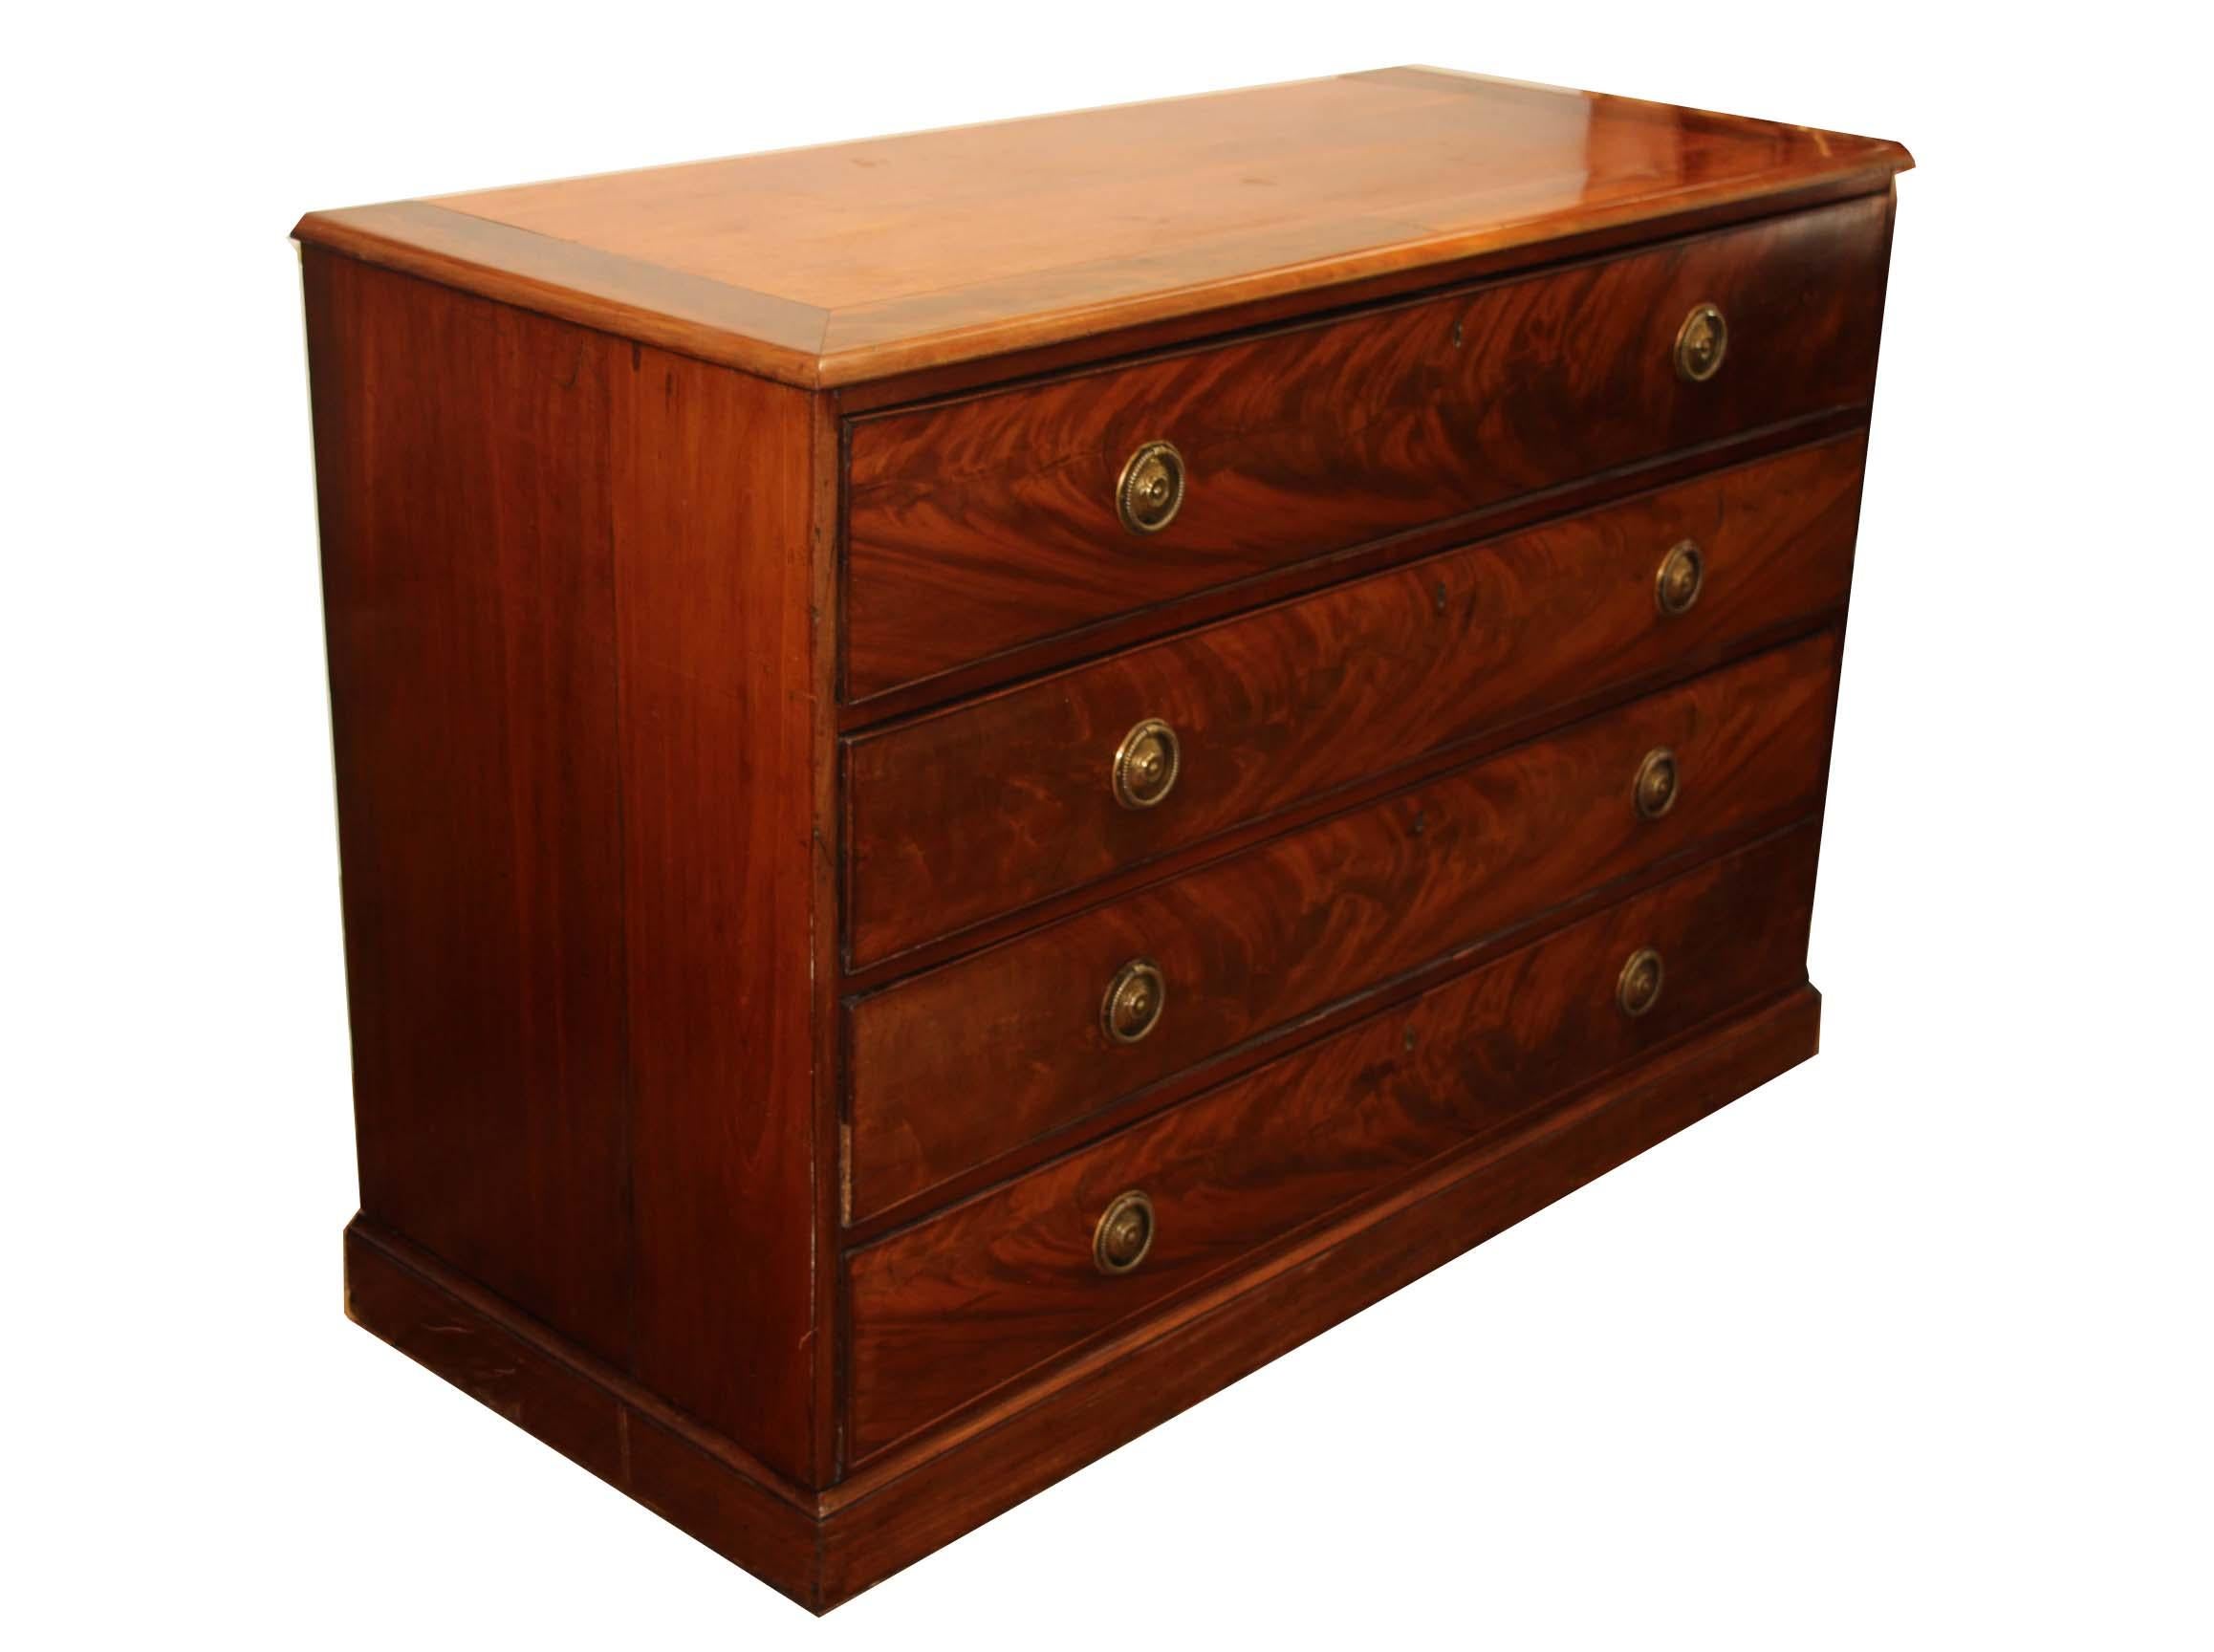 A spectacular piece of English craftsmanship. The details are amazing. Desktop is tooled leather, multiple drawers as well as three hidden drawers in the trim and behind doors. This piece is not done justice in photos. All hardware and trim elements